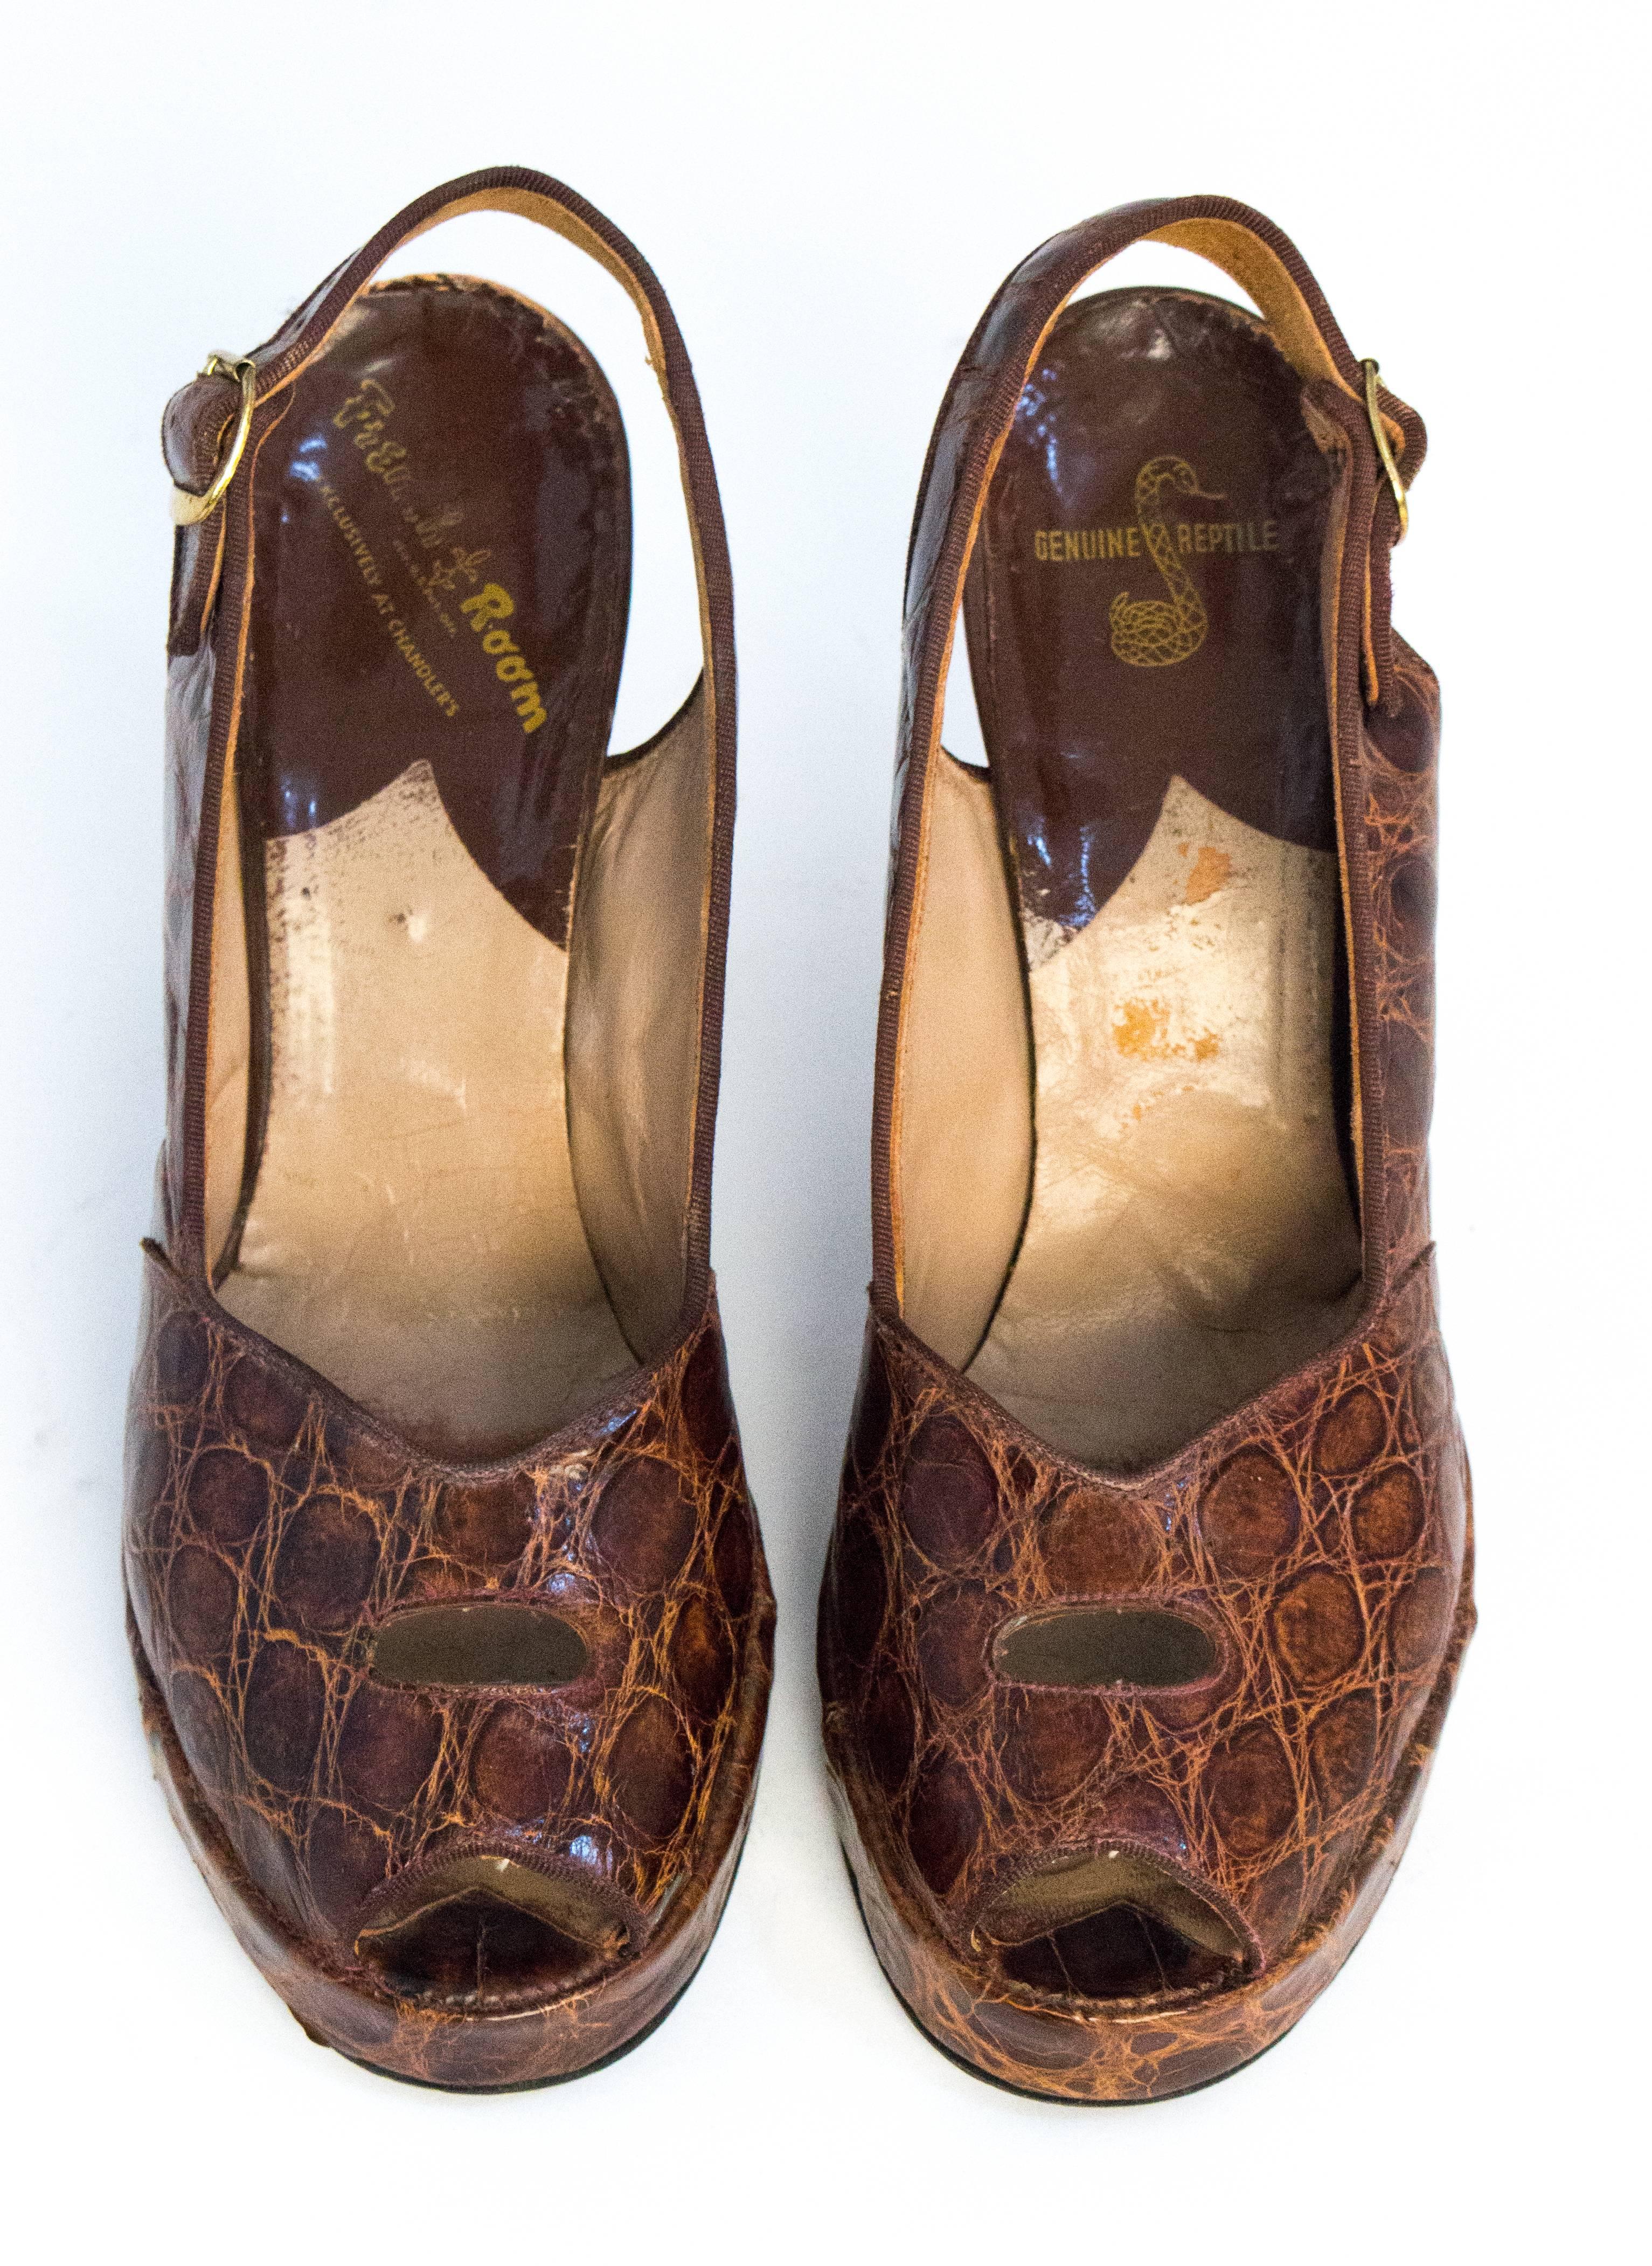 40s peep toe slingback platforms. Cutout on top line of toe box. Leather soles. 

Measurements 

Insole: 9 1/4